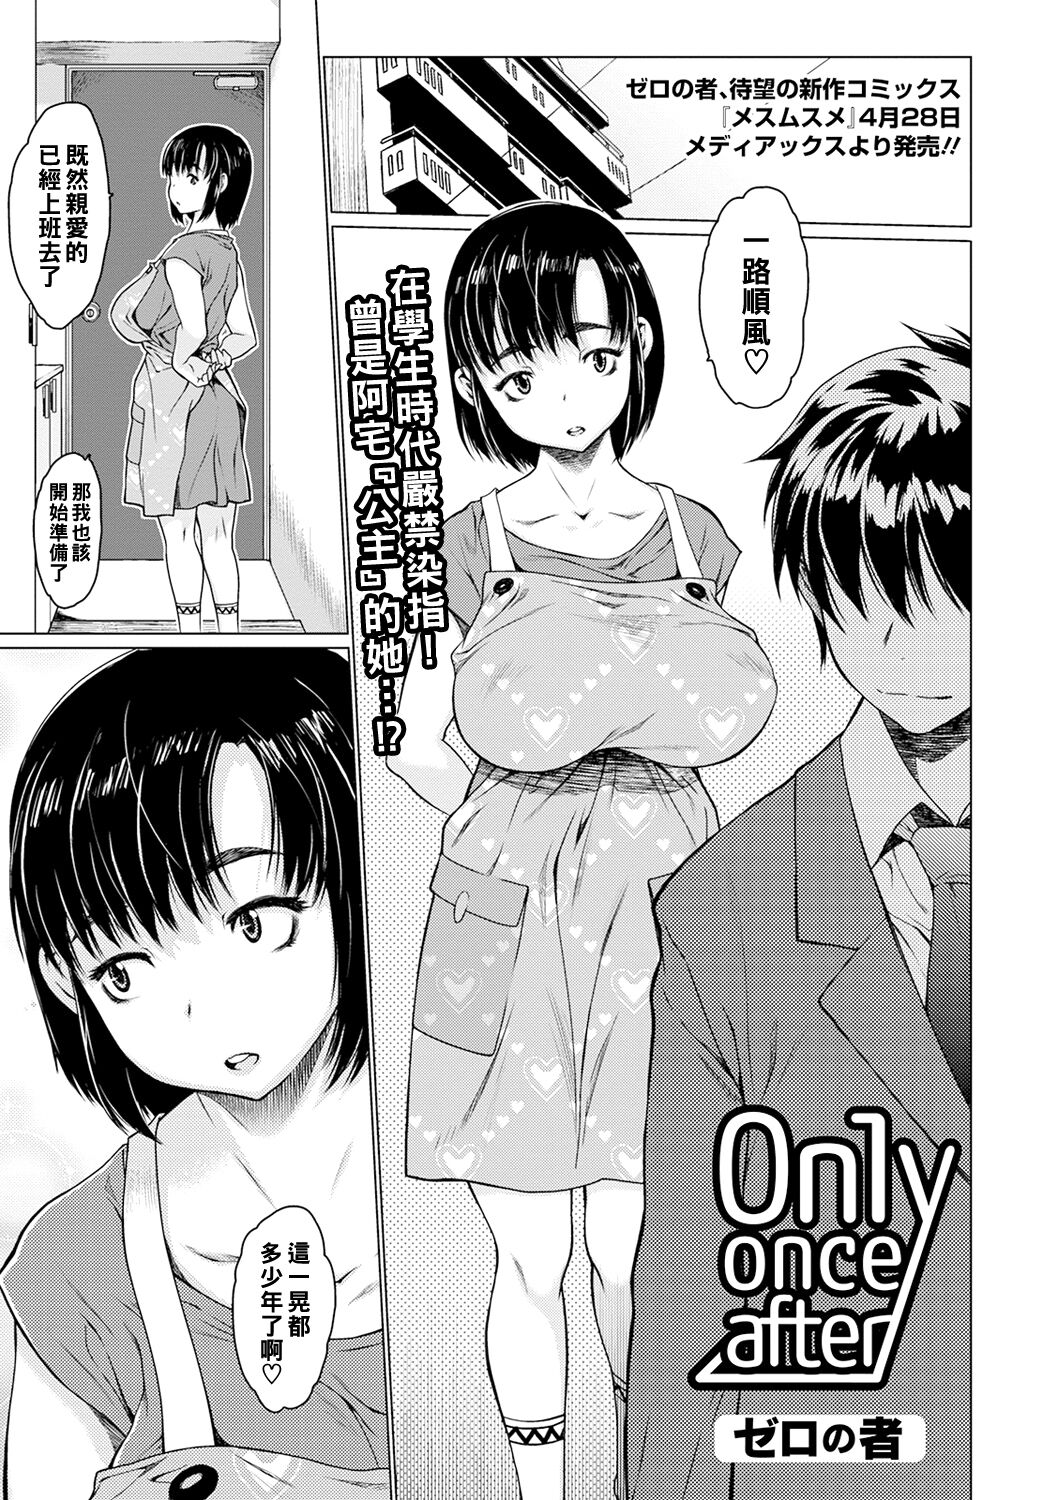 [Zero no Mono] Only once after (COMIC JSCK Vol. 7) [Chinese] [Digital] [ゼロの者] Only once after (コミックジェシカ Vol.7) [中国翻訳] [DL版]